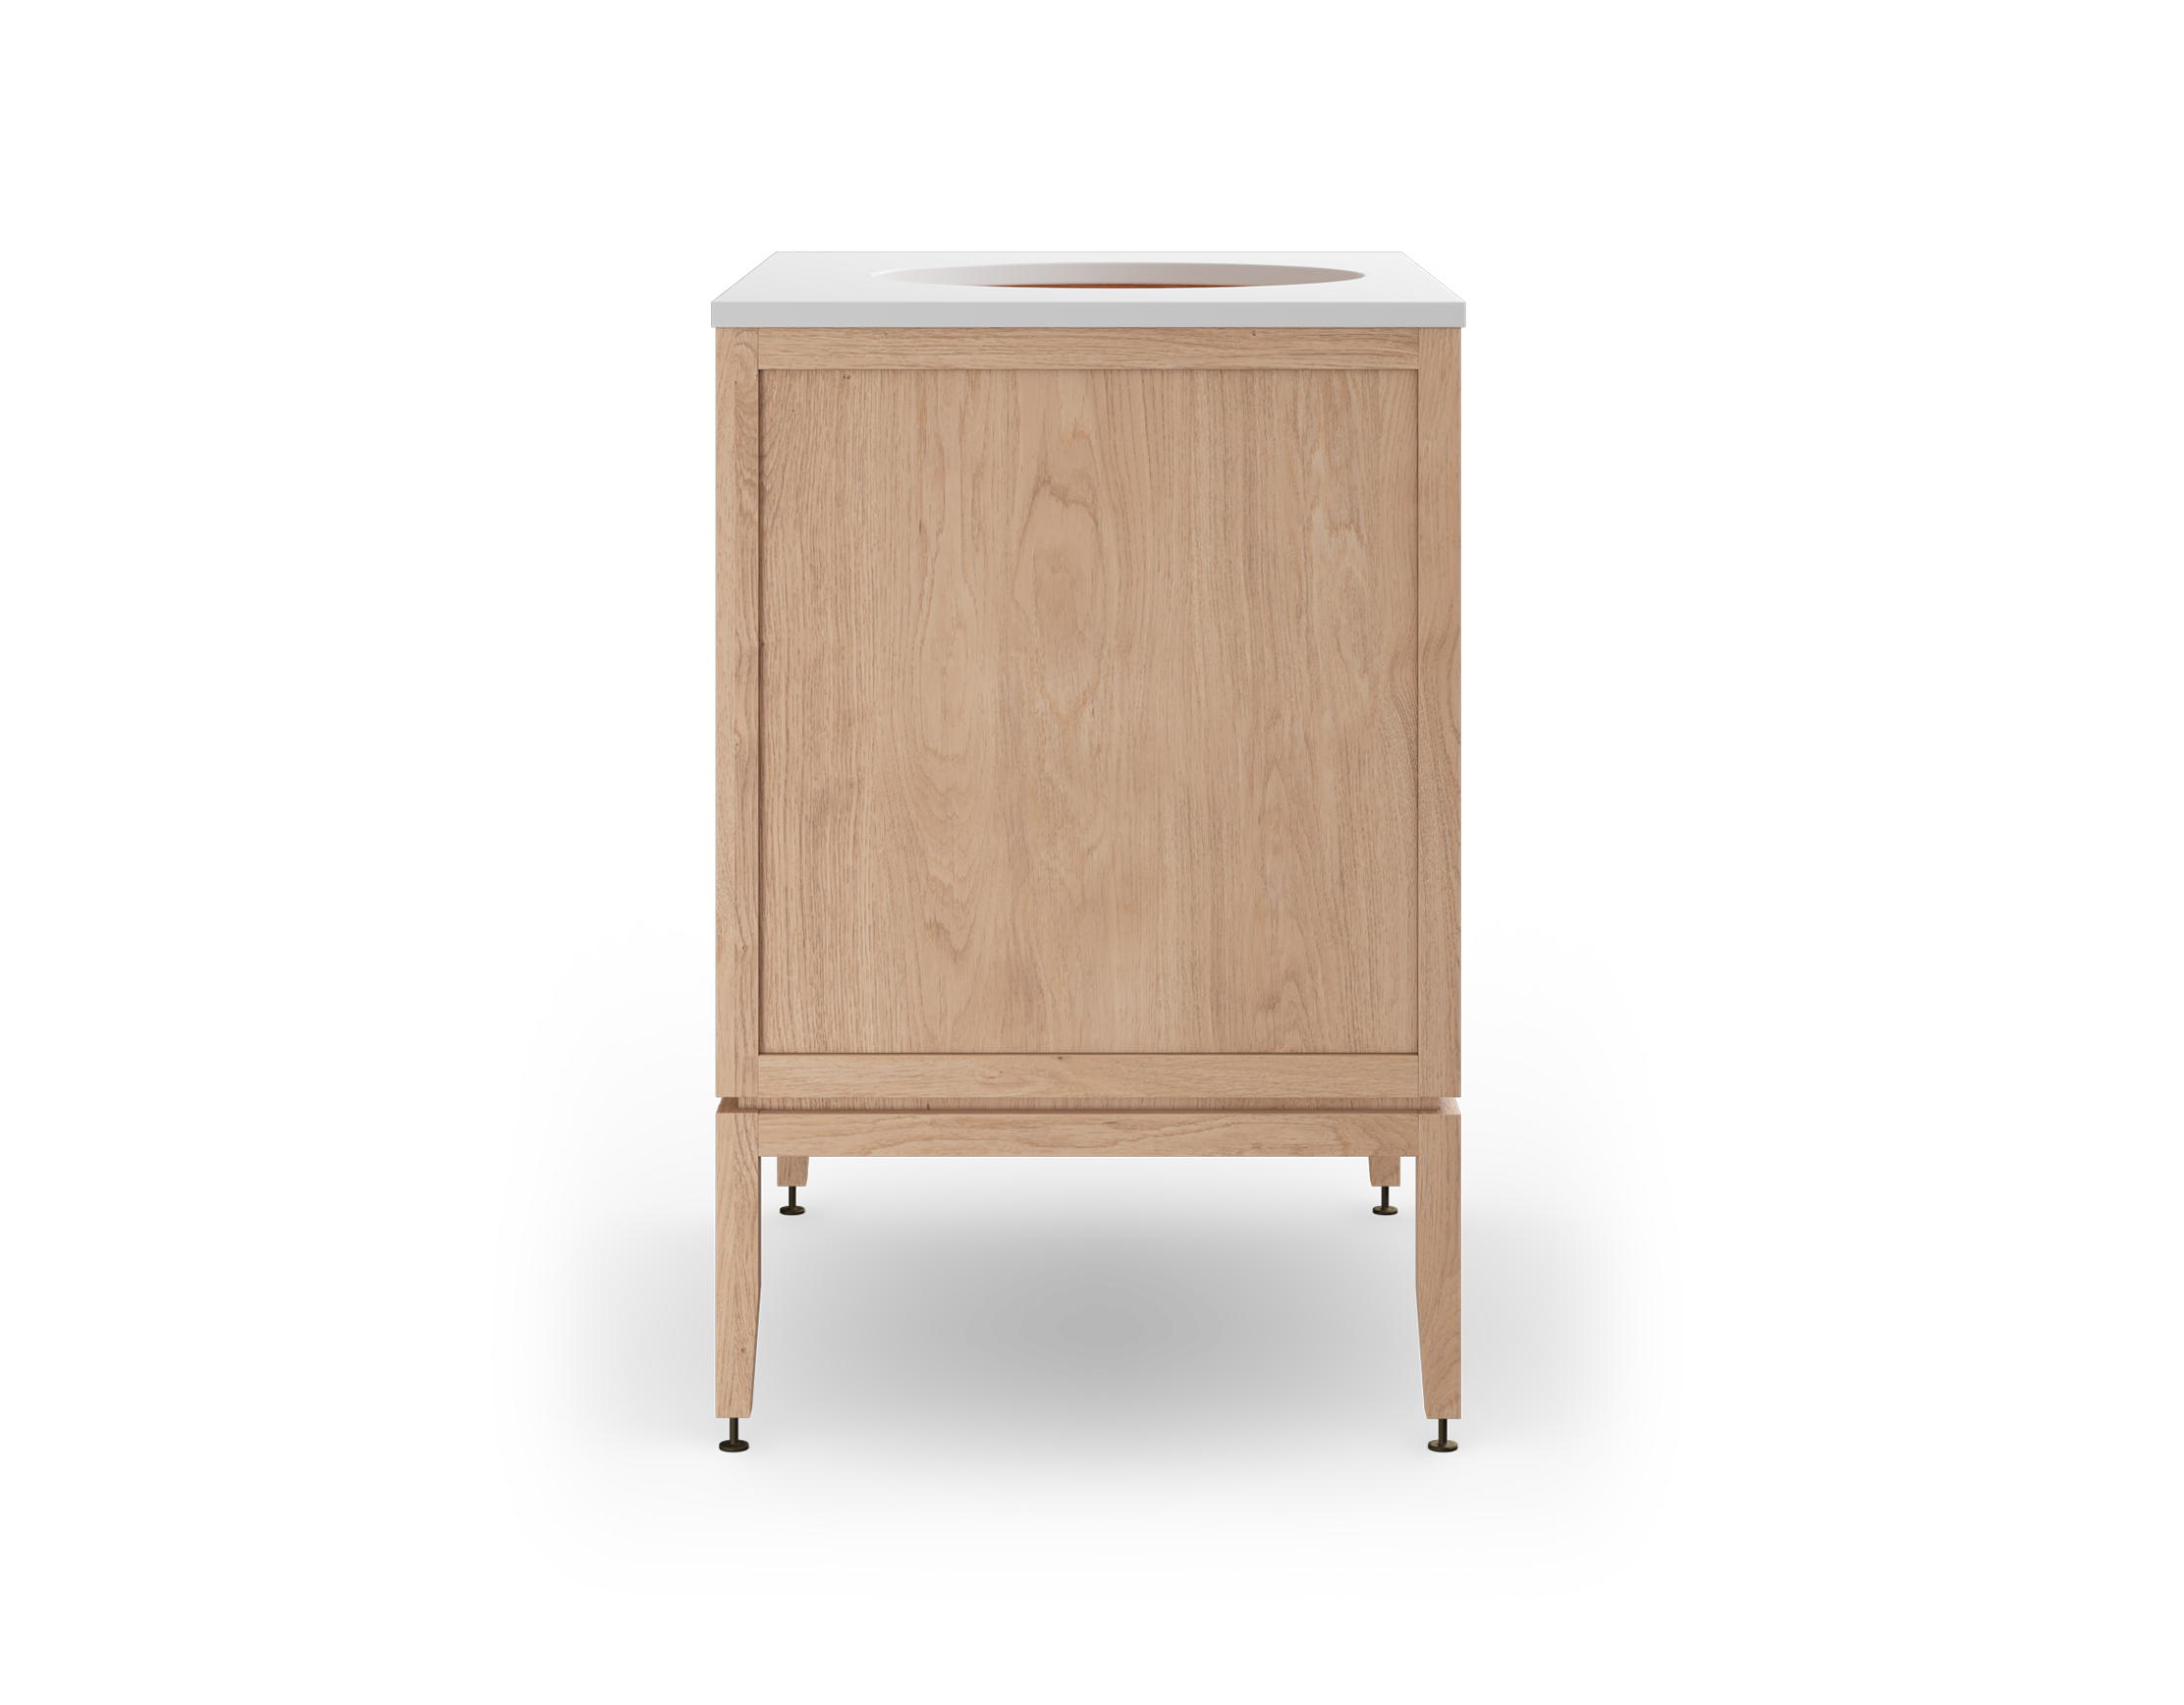 Coquo modular bathroom vanity with fix front and two doors in natural oak.